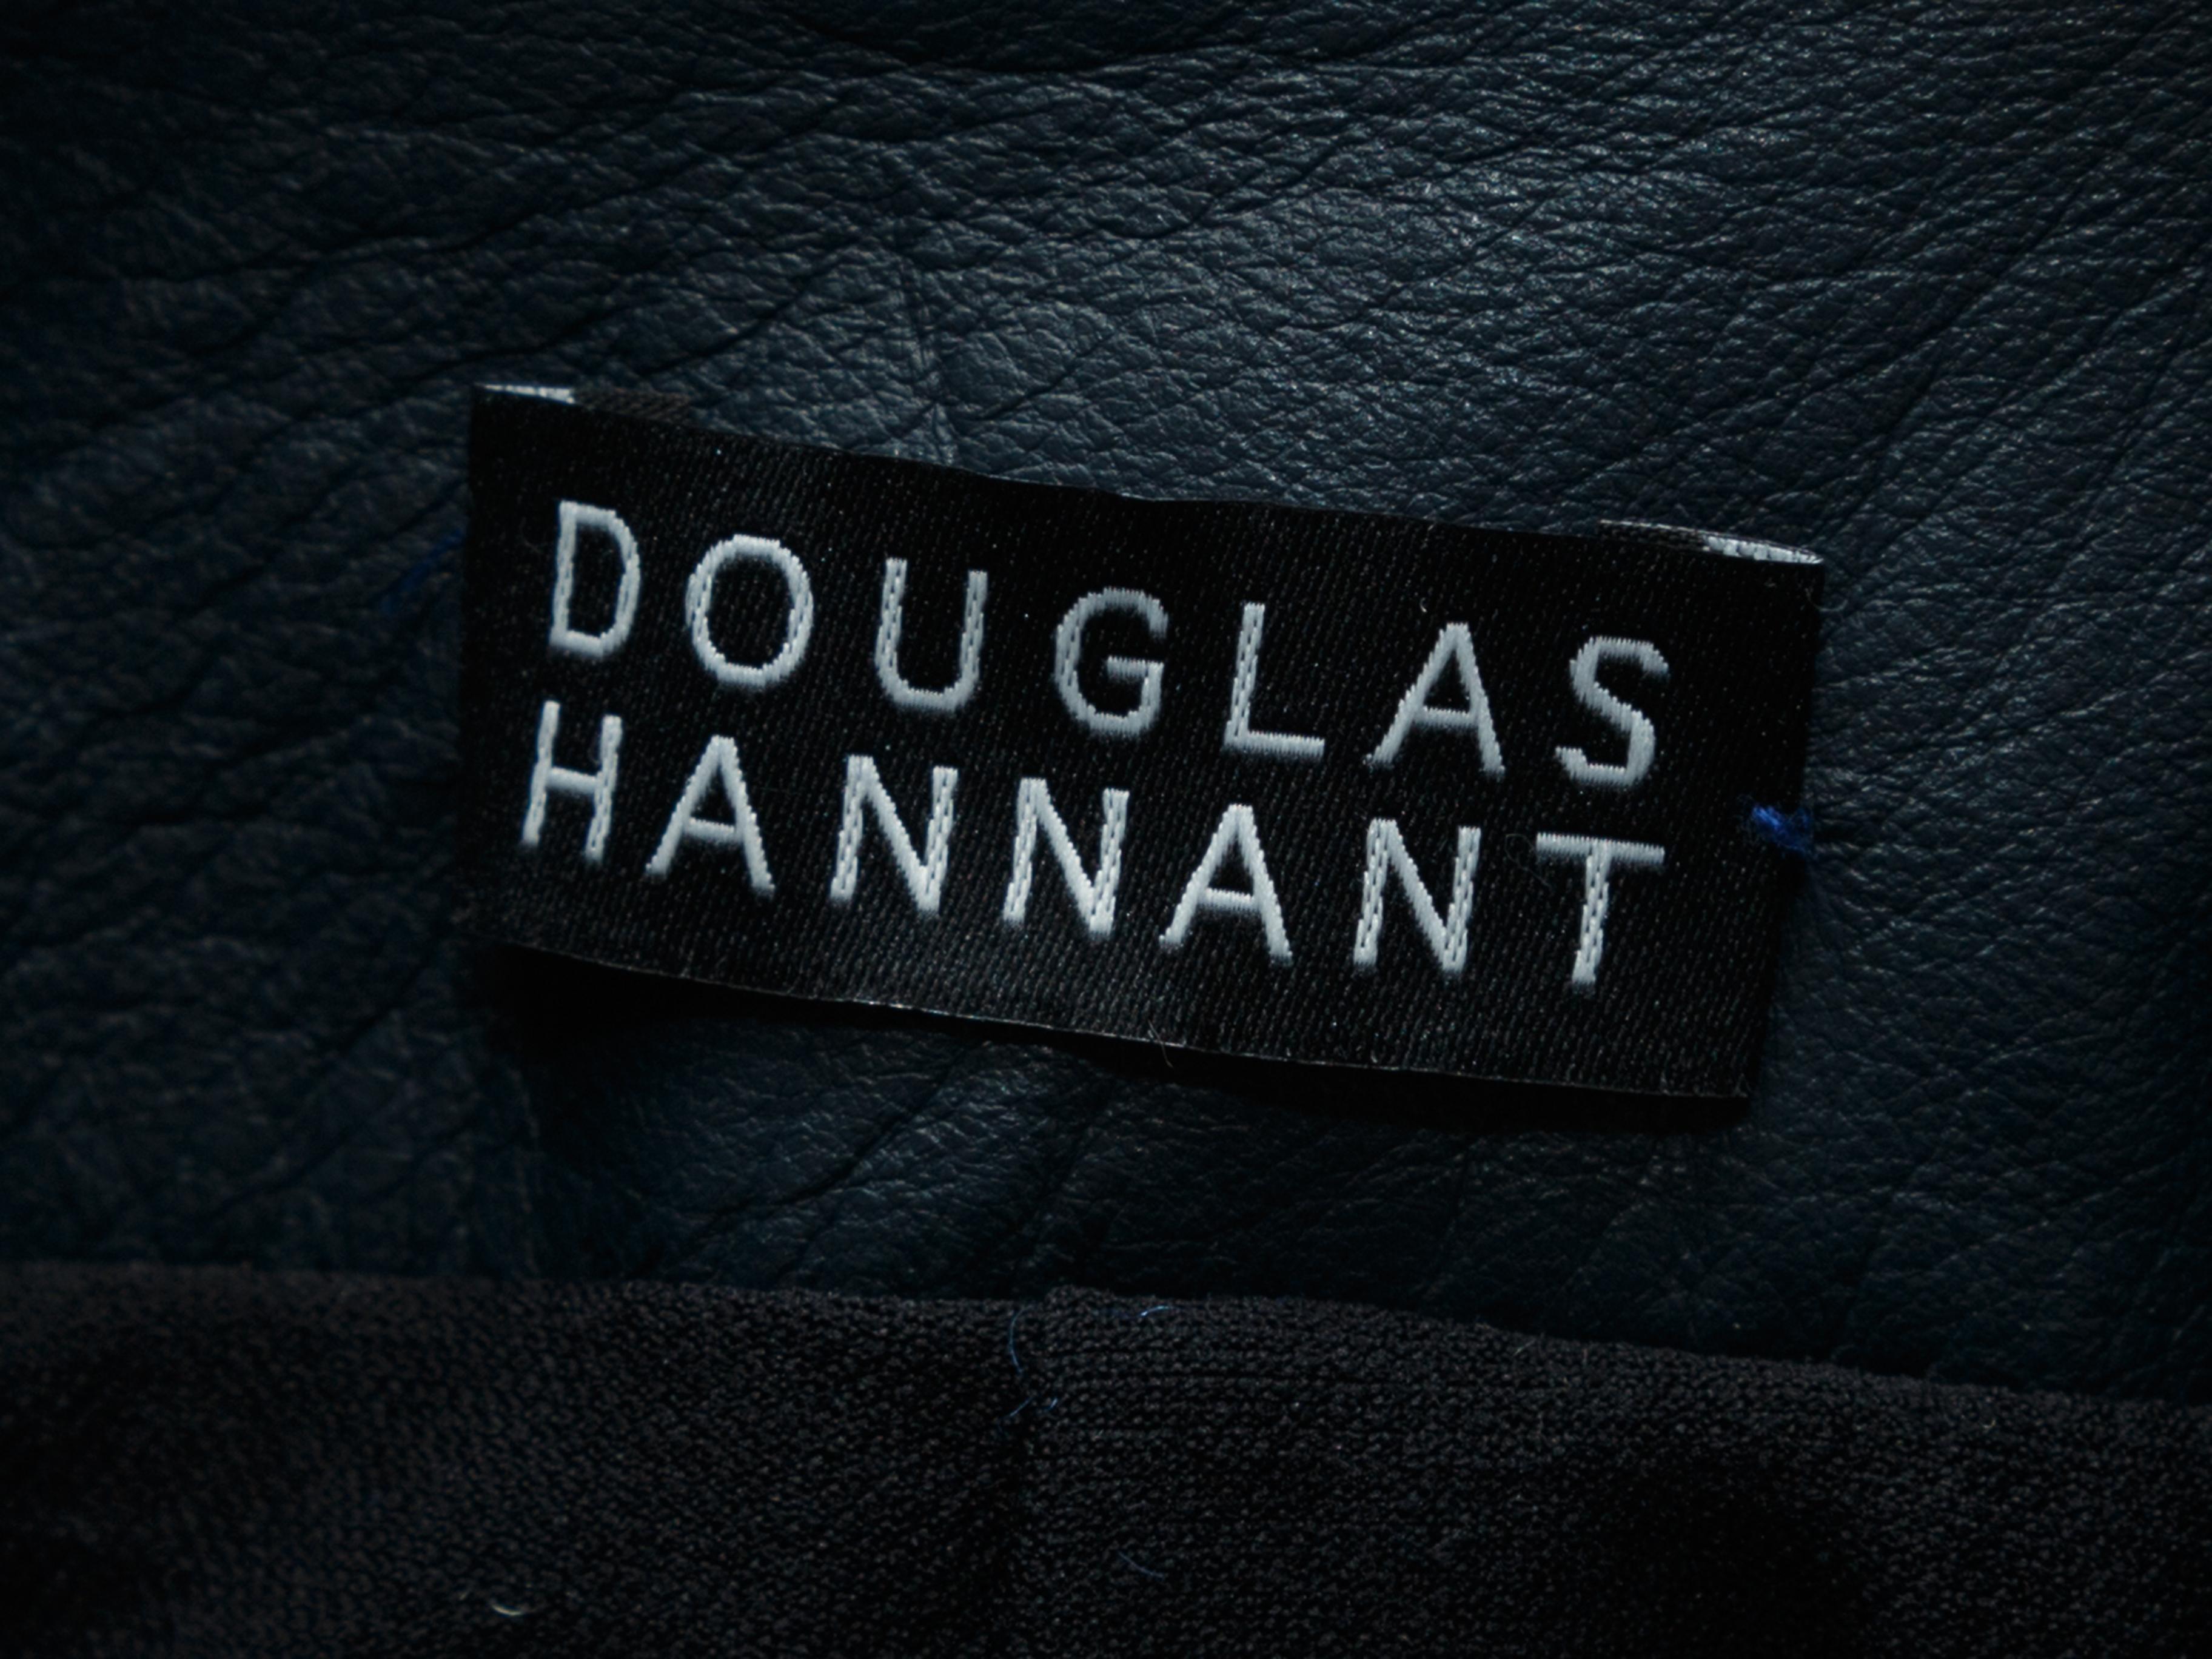 Product details: Blue and black dress and jacket set by Douglas Hannant. From the Fall/Winter 2014 Collection. Boat neck. Dress features leather accent panels and zip closure at back. Jacket features notch collar and leather trim. Jacket- 30